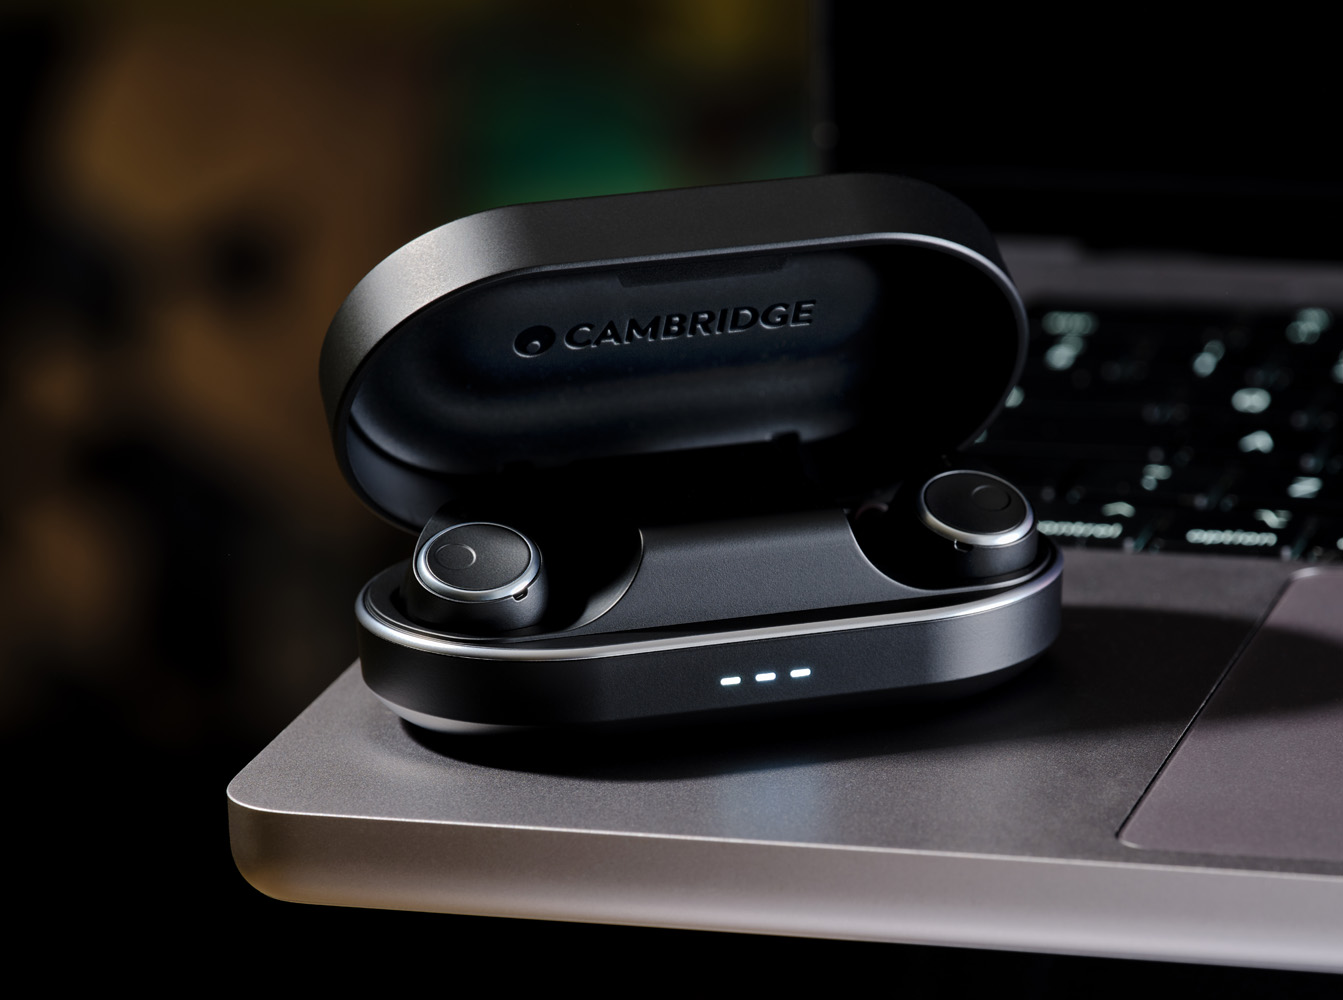 You’ll want to get these limited-edition lossless Cambridge Audio earphones